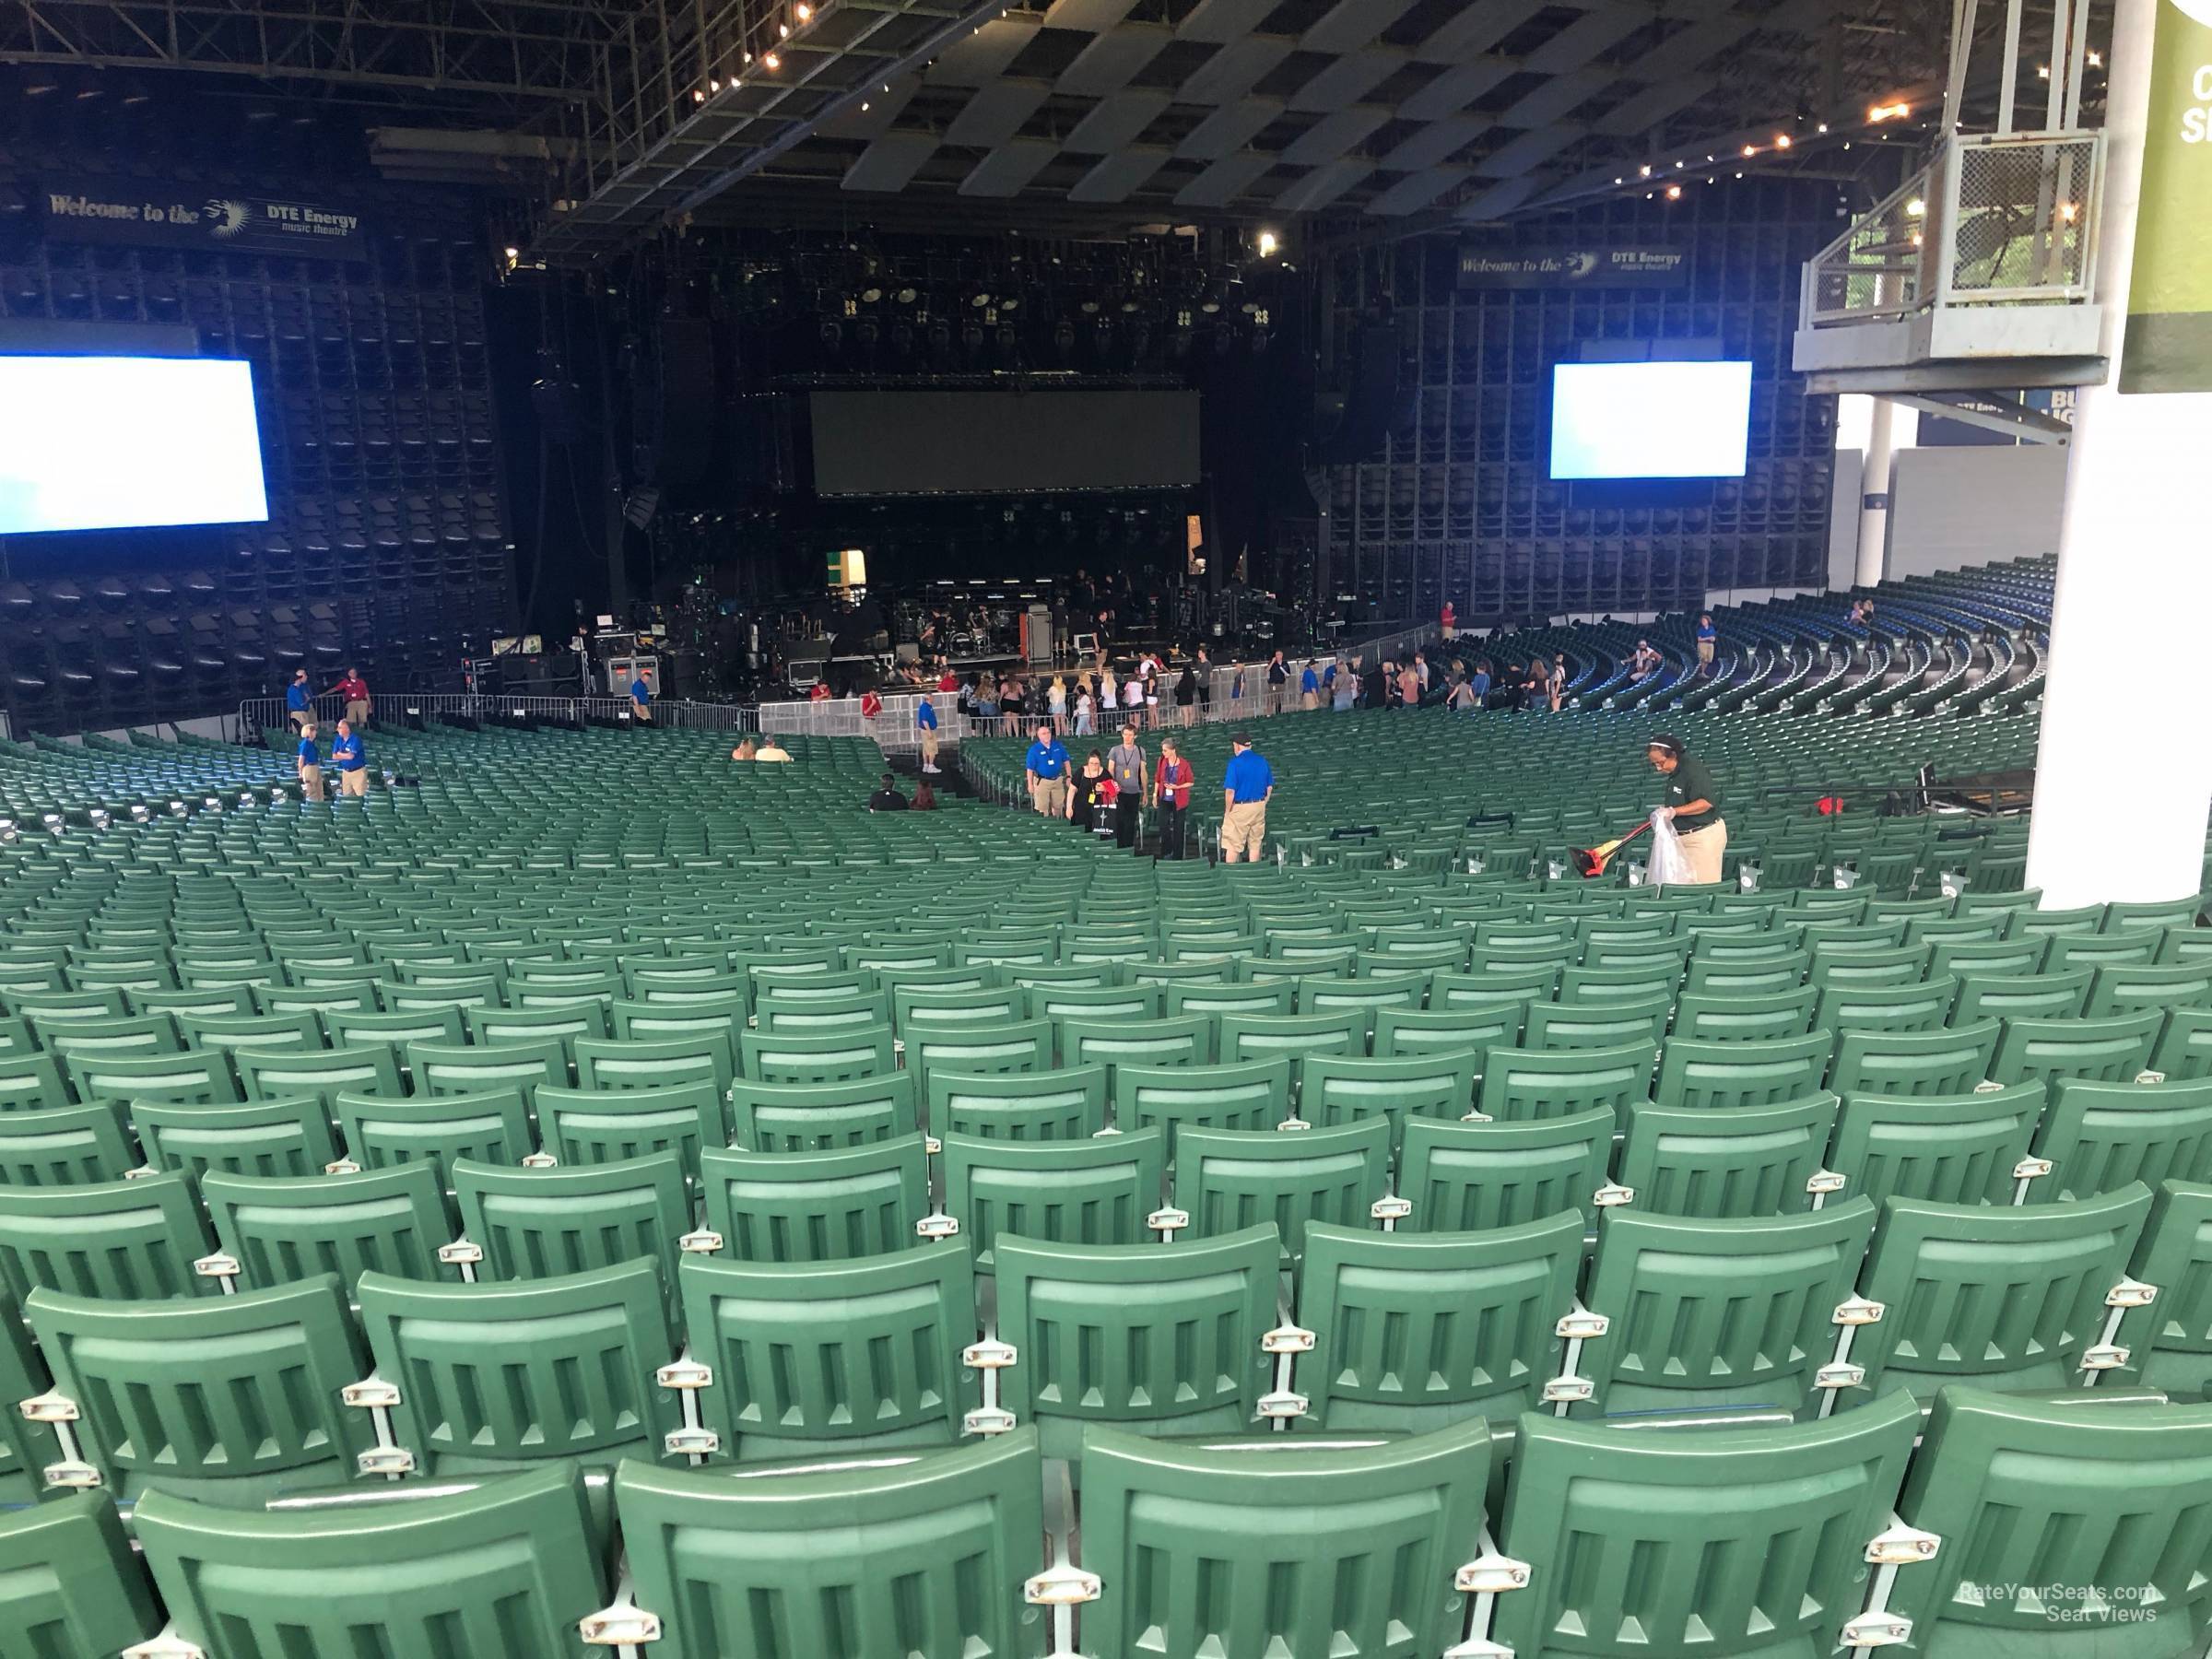 Left Center 10 at DTE Energy Music Theatre - RateYourSeats.com